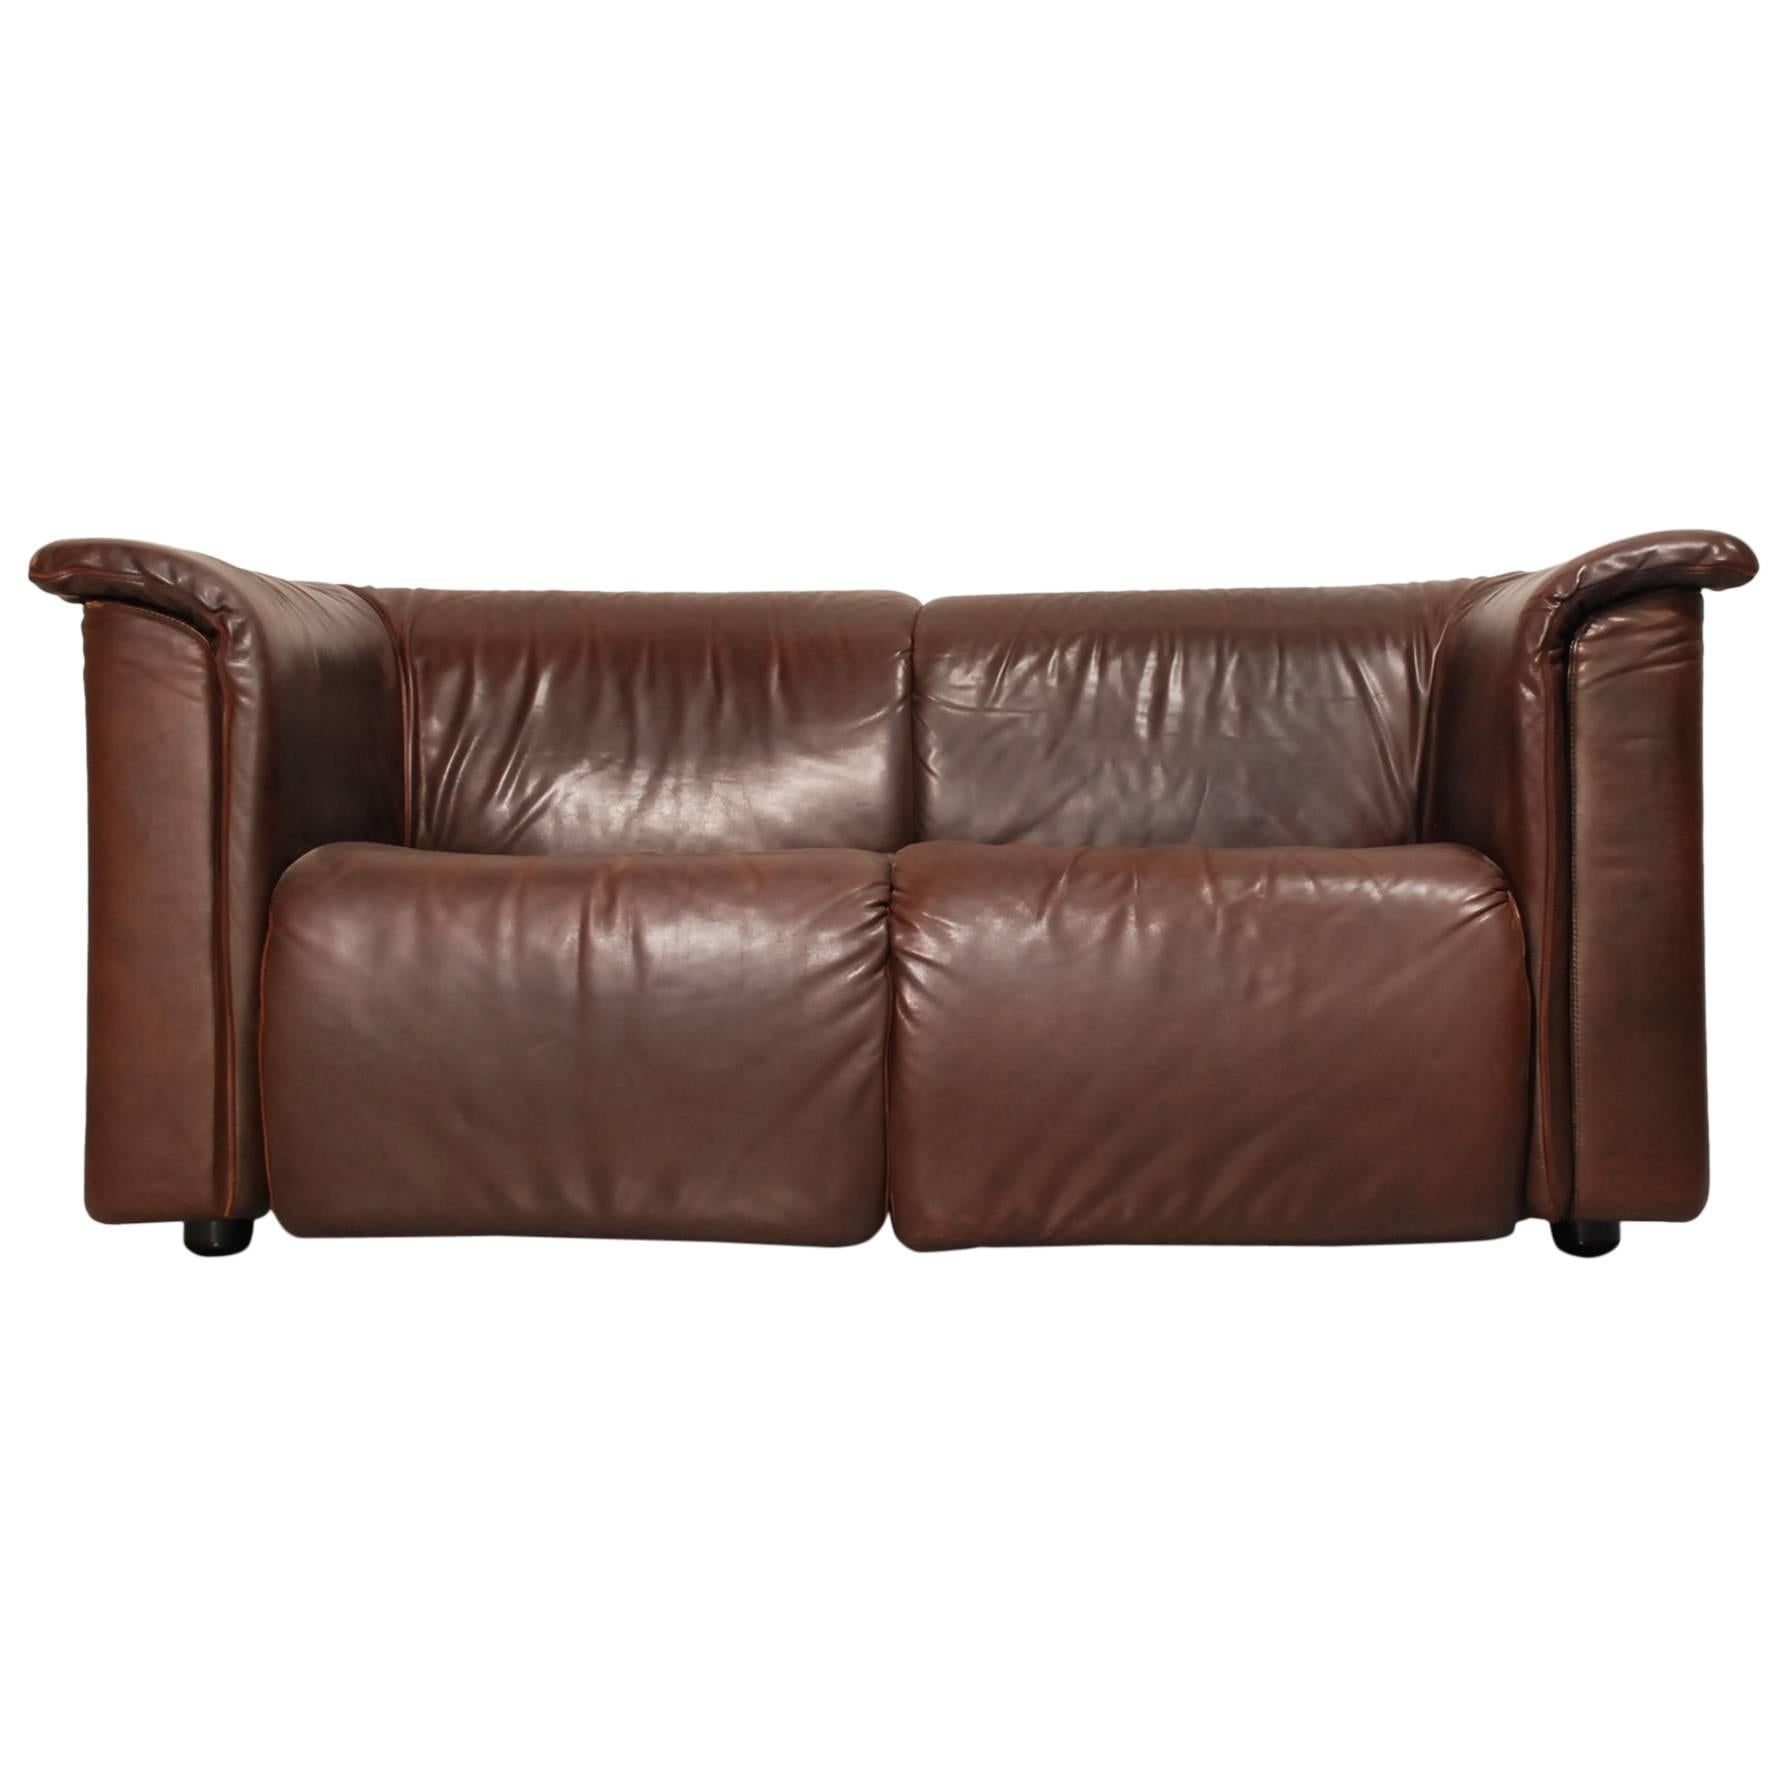 One of Two Leather Two-Seat "Hochbarett" by Karl Wittmann For Sale